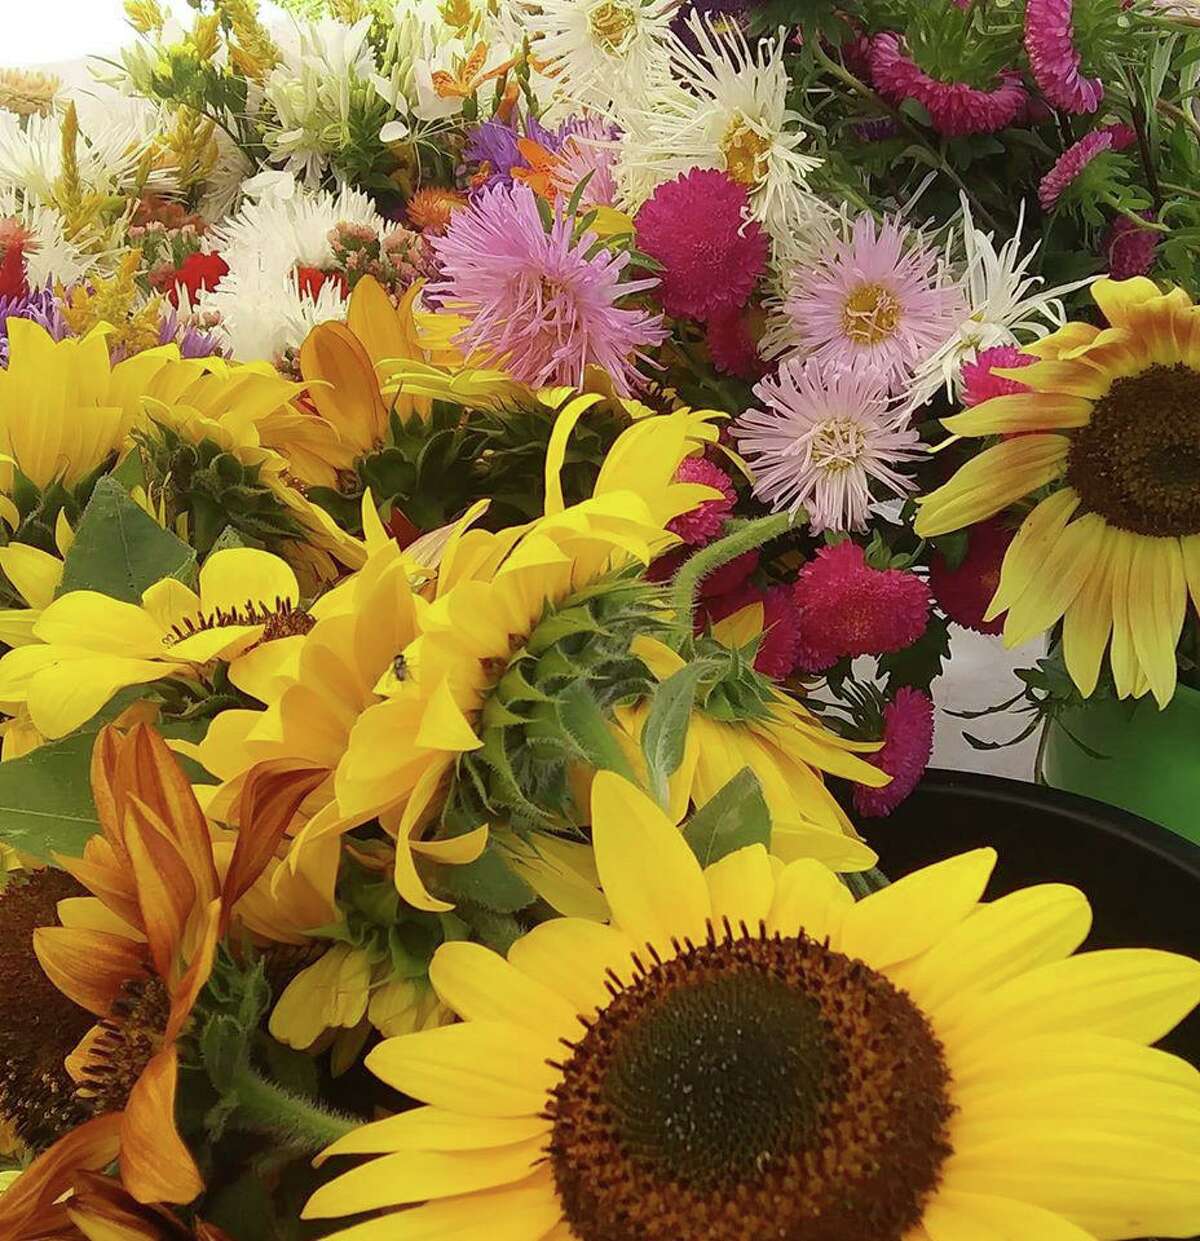 Flowers for sale at last year’s farmers market.